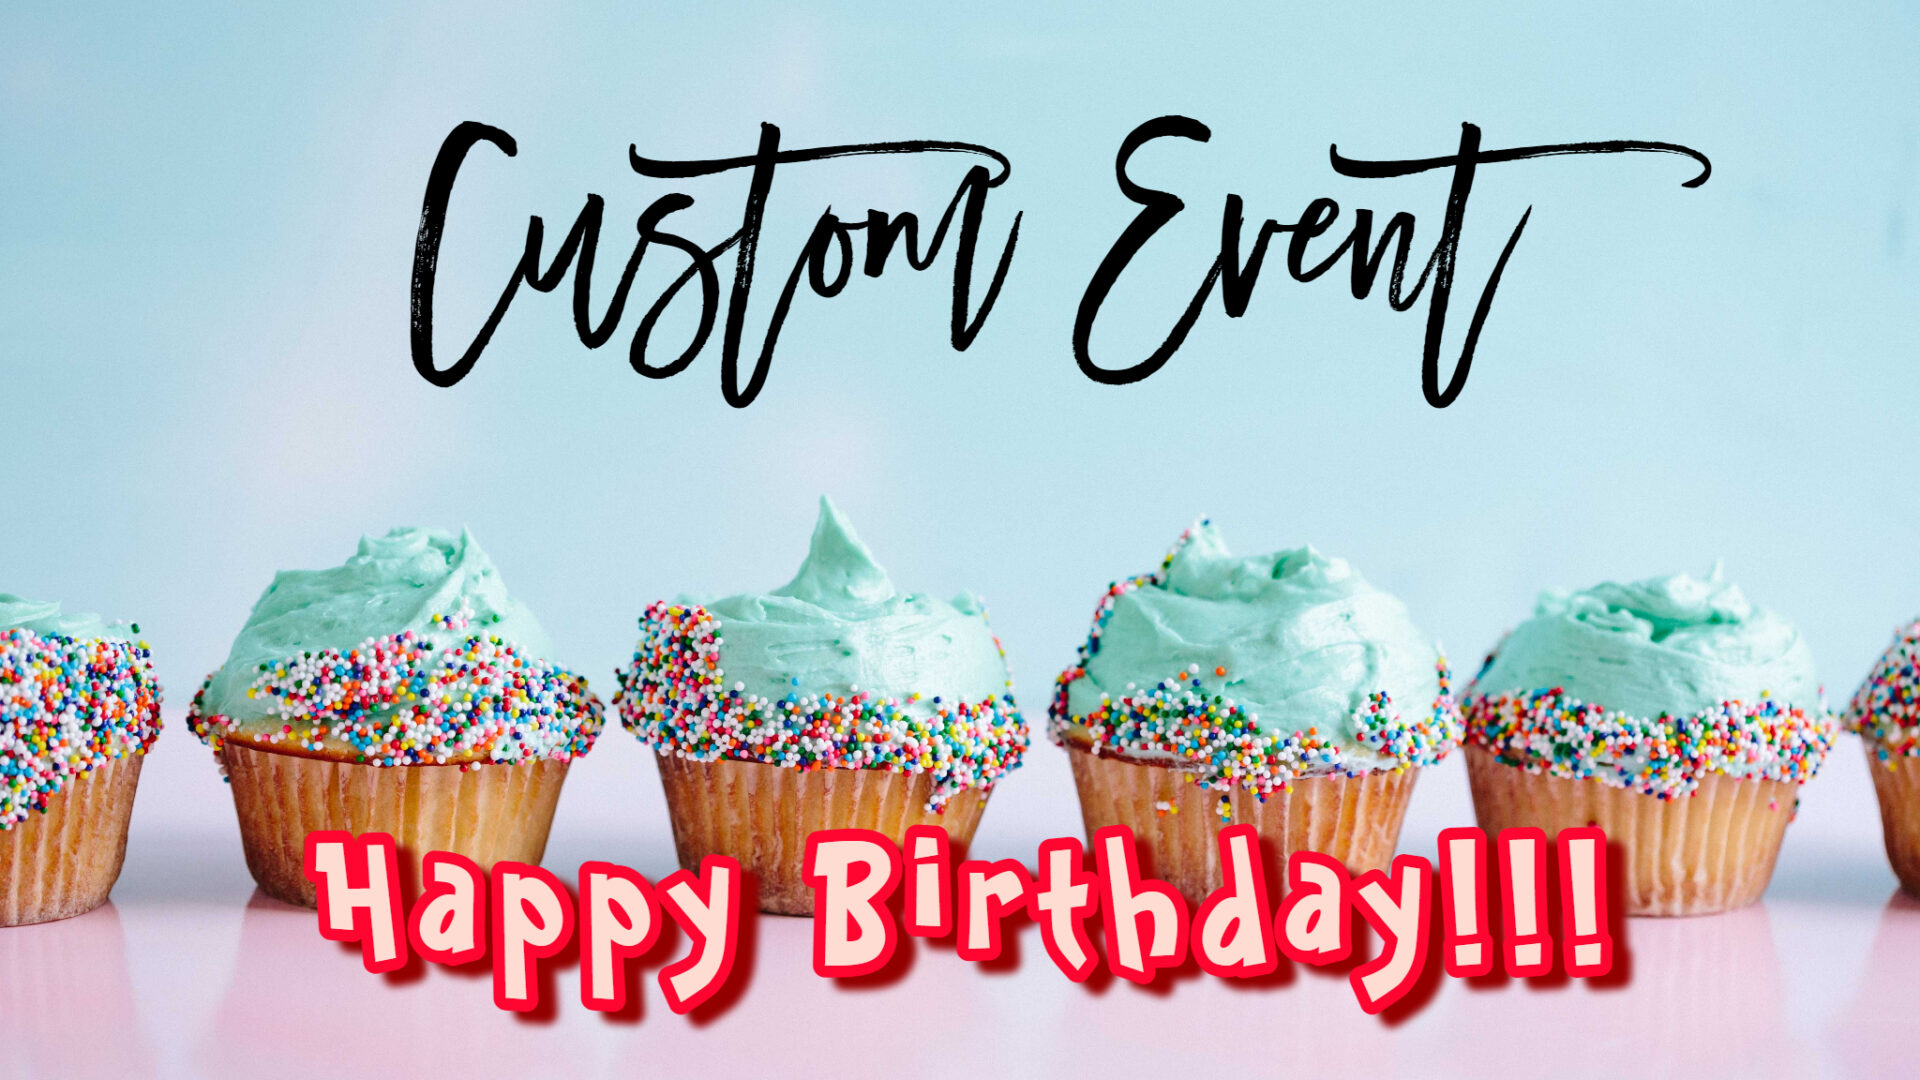 A birthday party with cupcakes and custom event text.